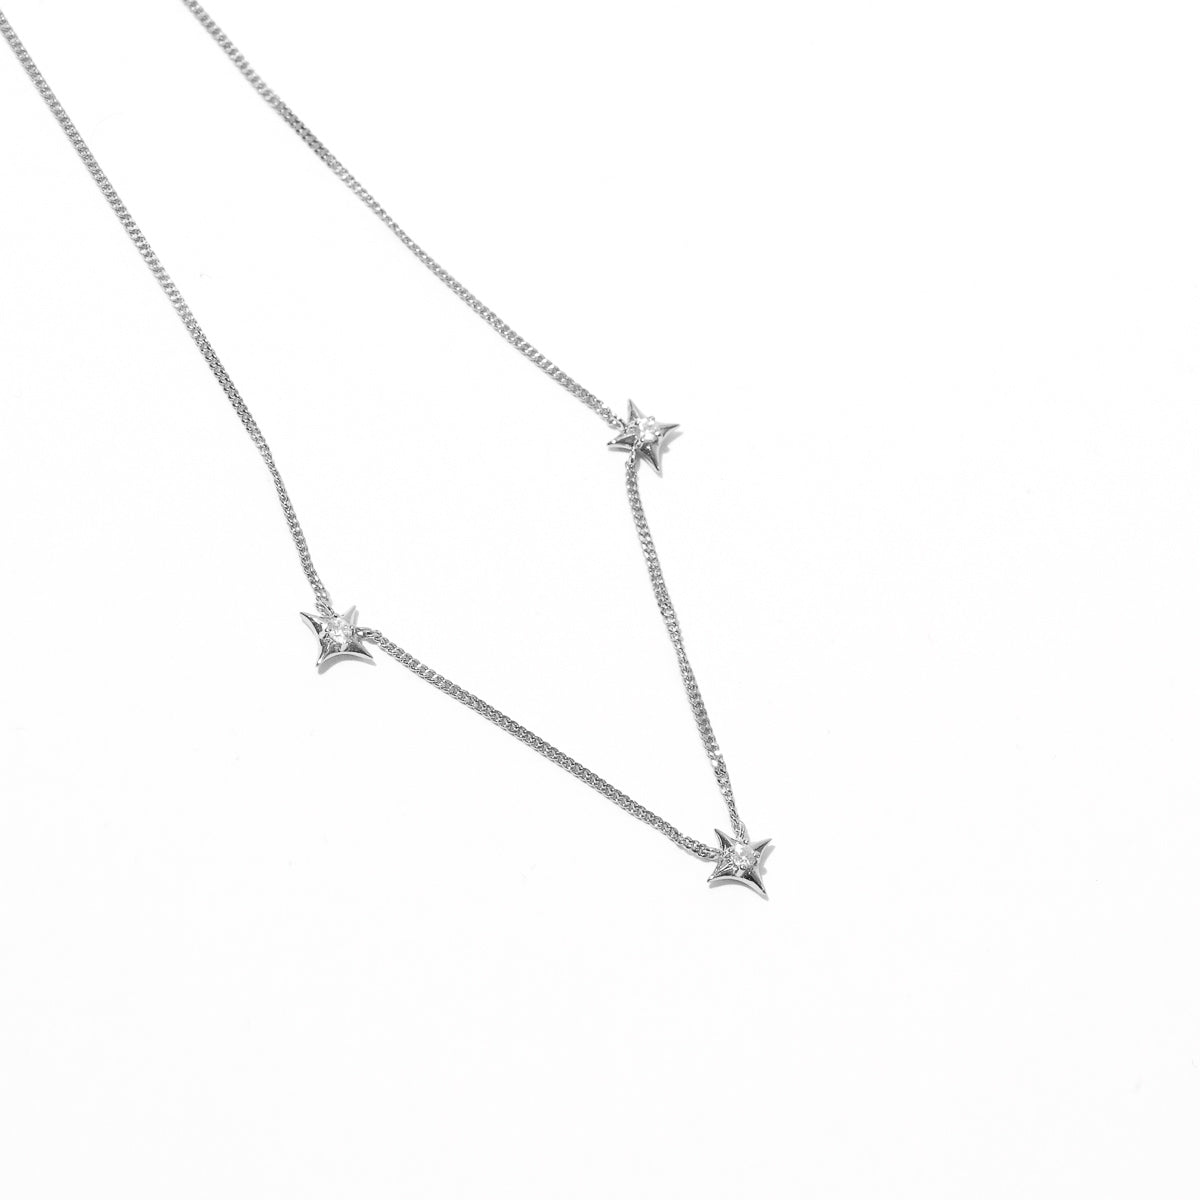 Cosmic Star Charm Necklace in Silver flat lay